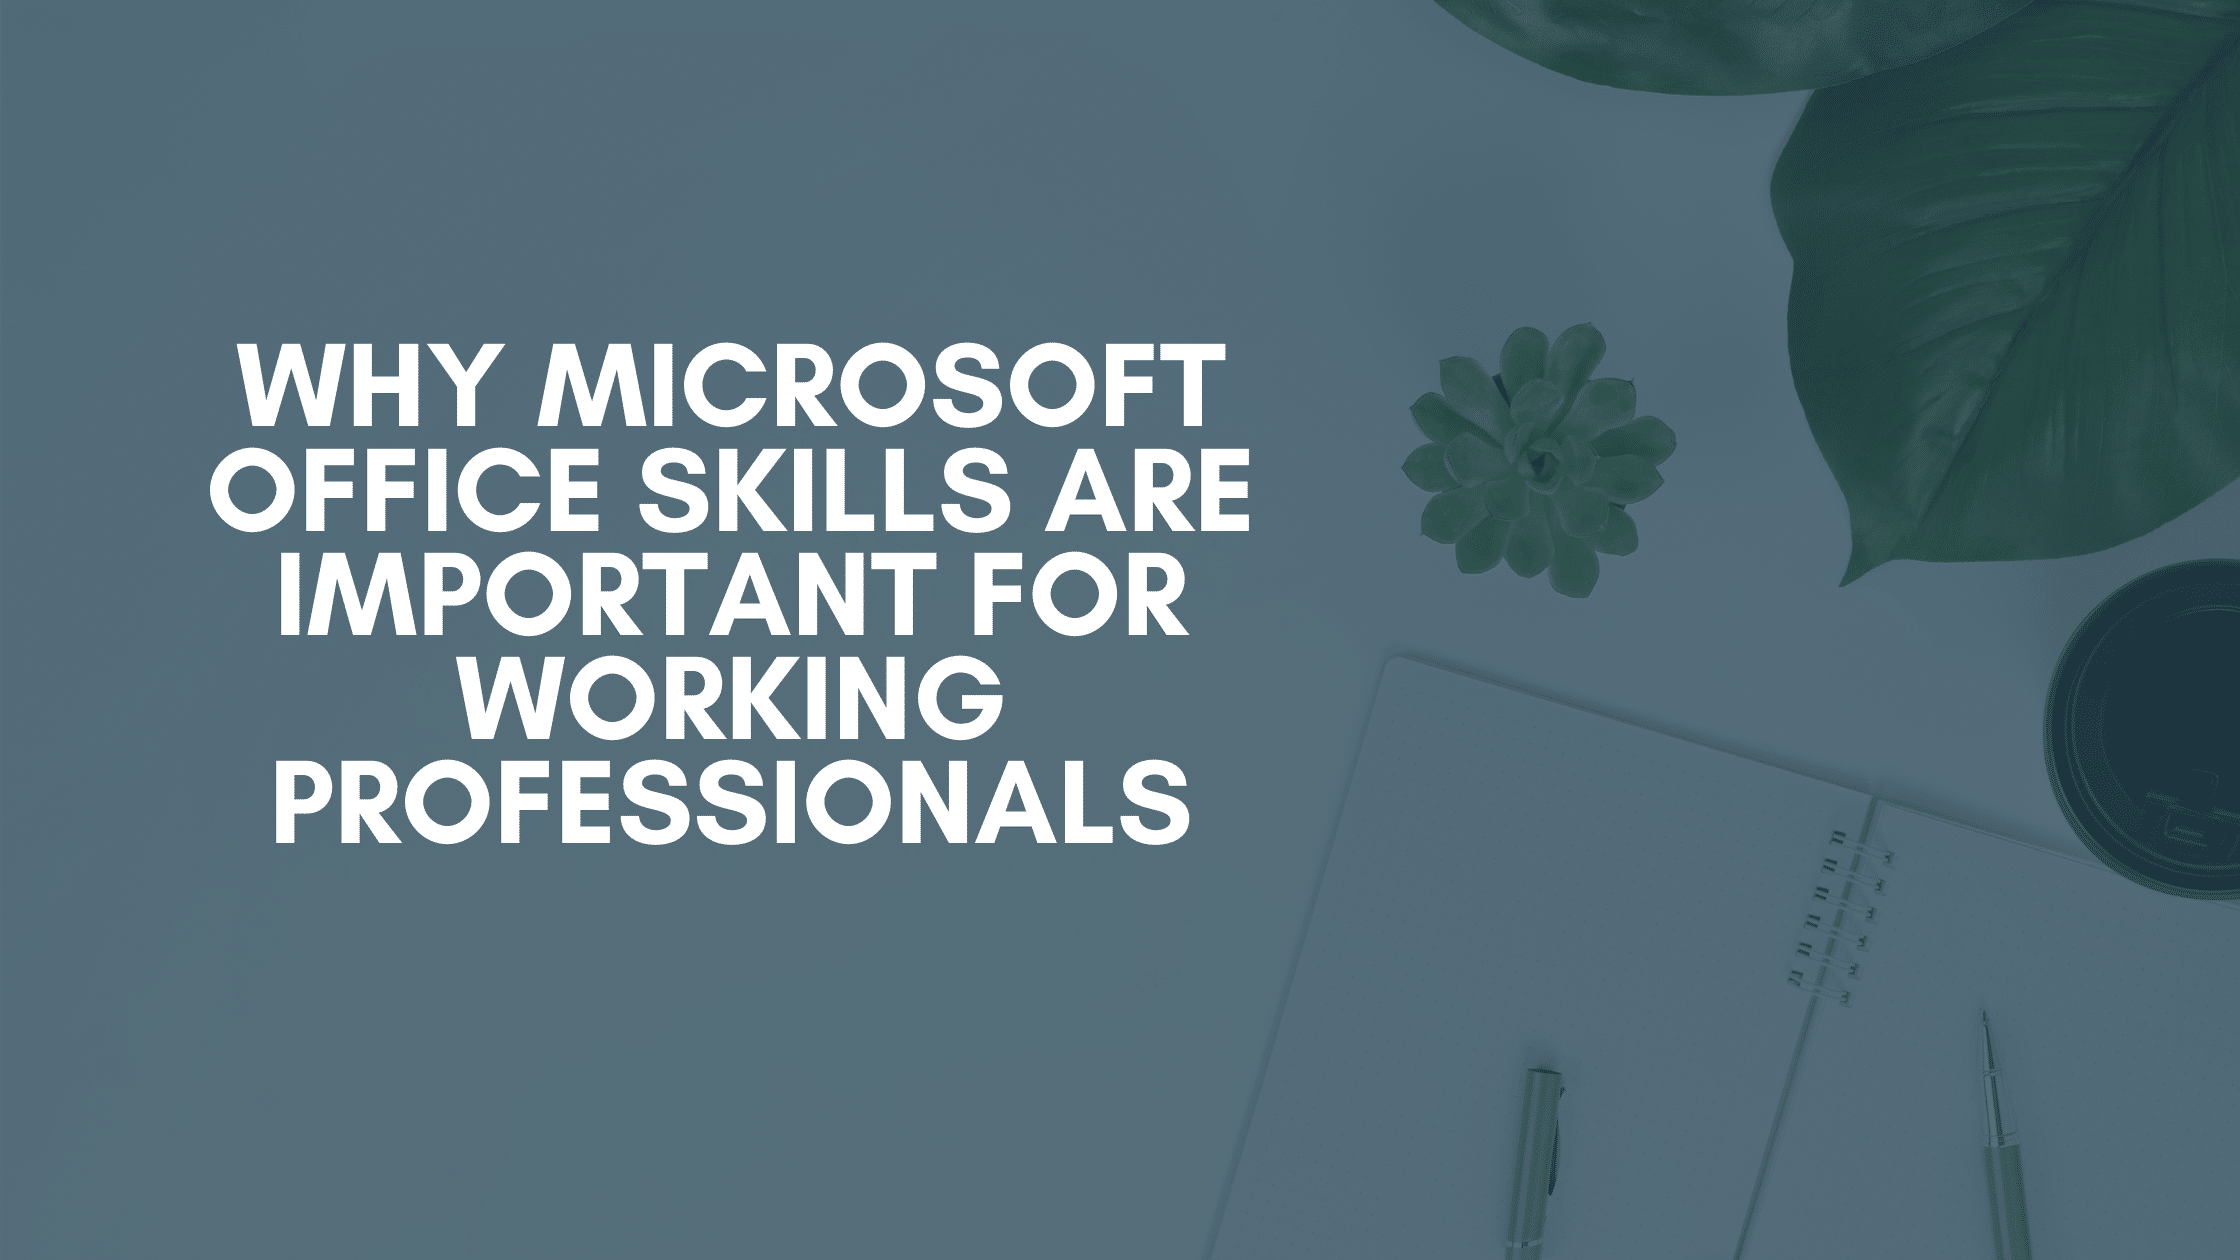 Microsoft Office skills for working professionals